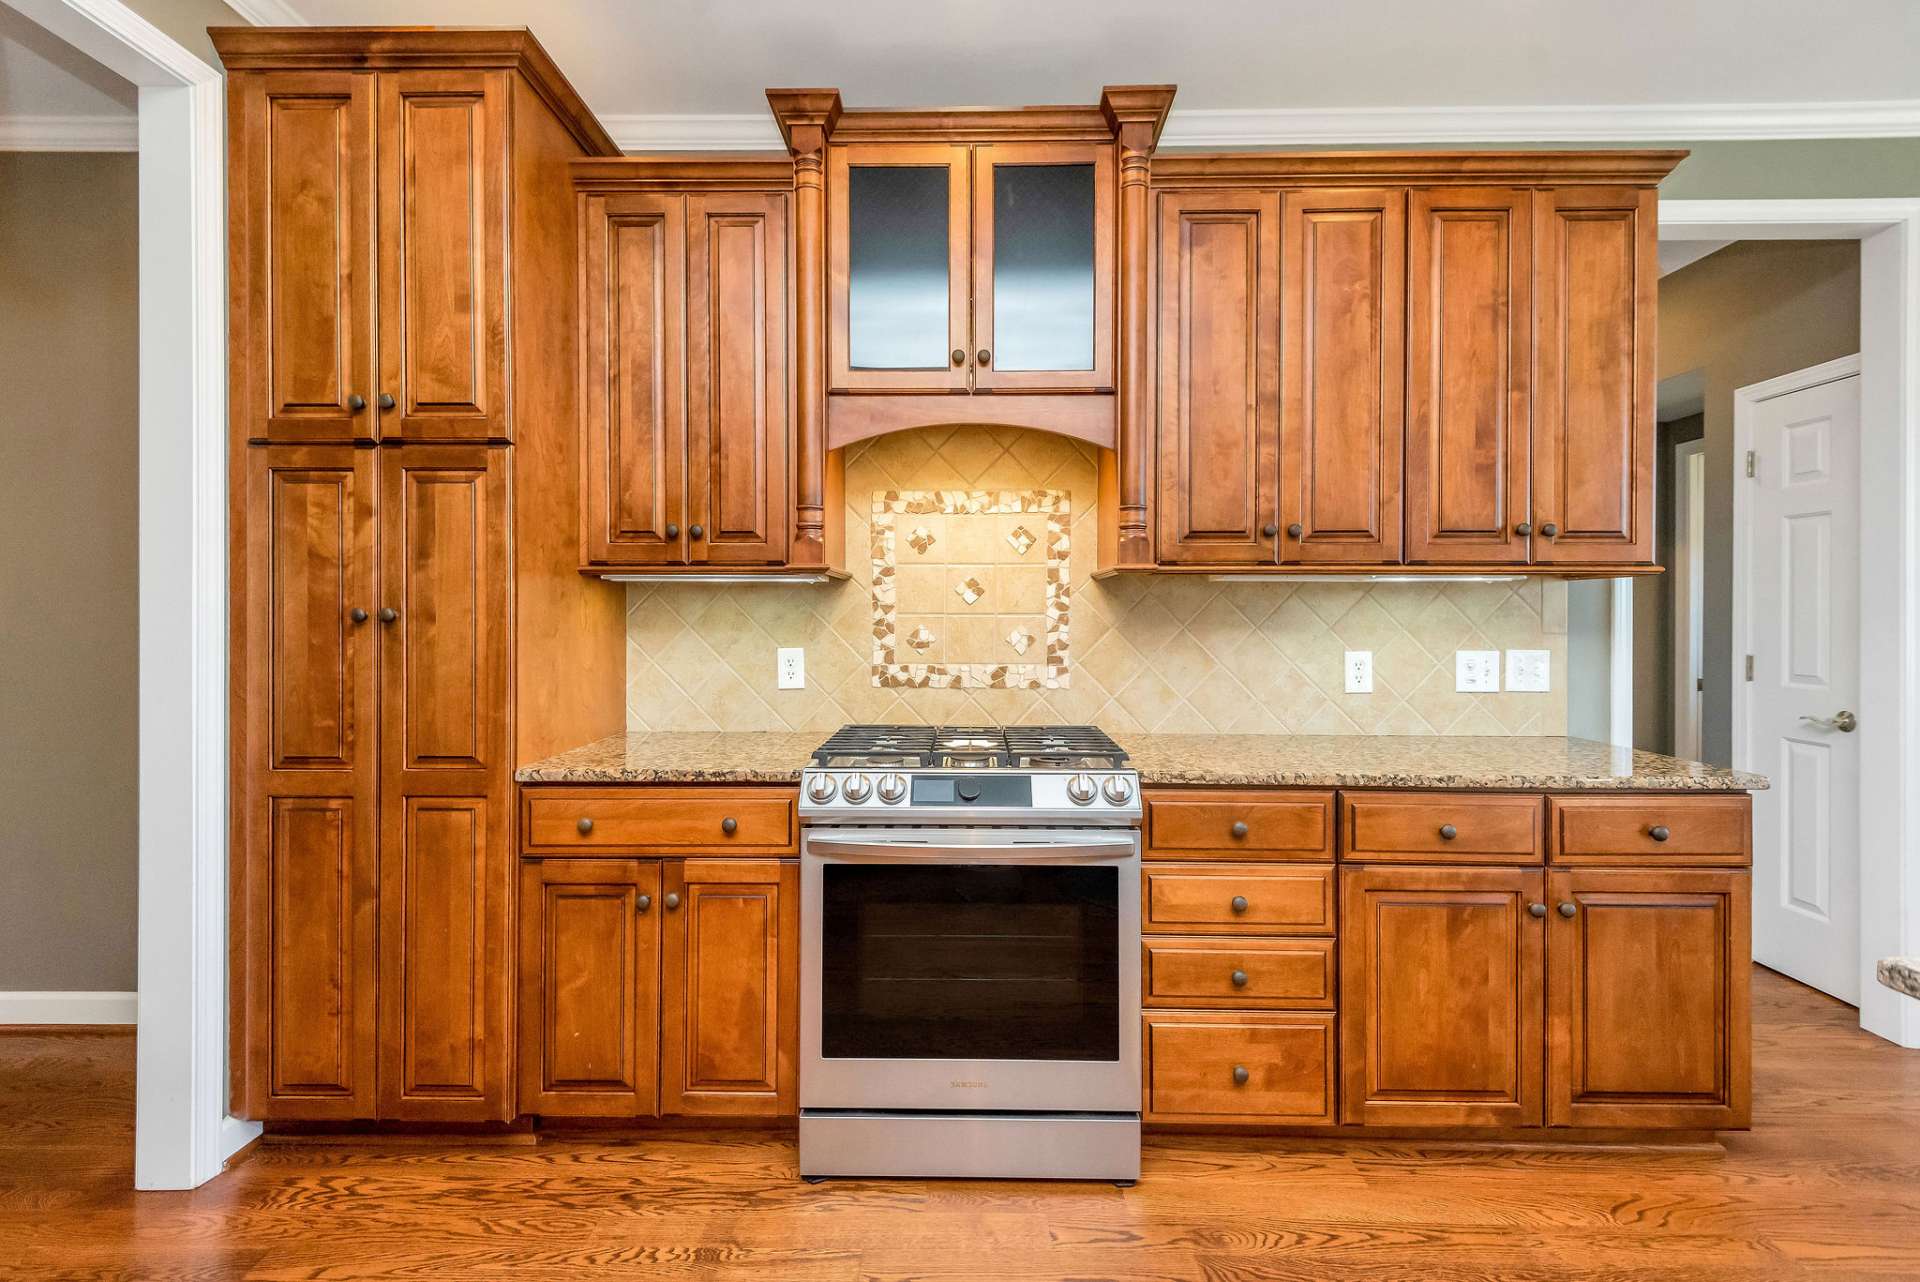 With its blend of cherry cabinetry, granite countertops, and stainless steel appliances, this kitchen is more than just a place to cook—it's a stylish and functional space where culinary dreams come to life, and cherished memories are made around the table.